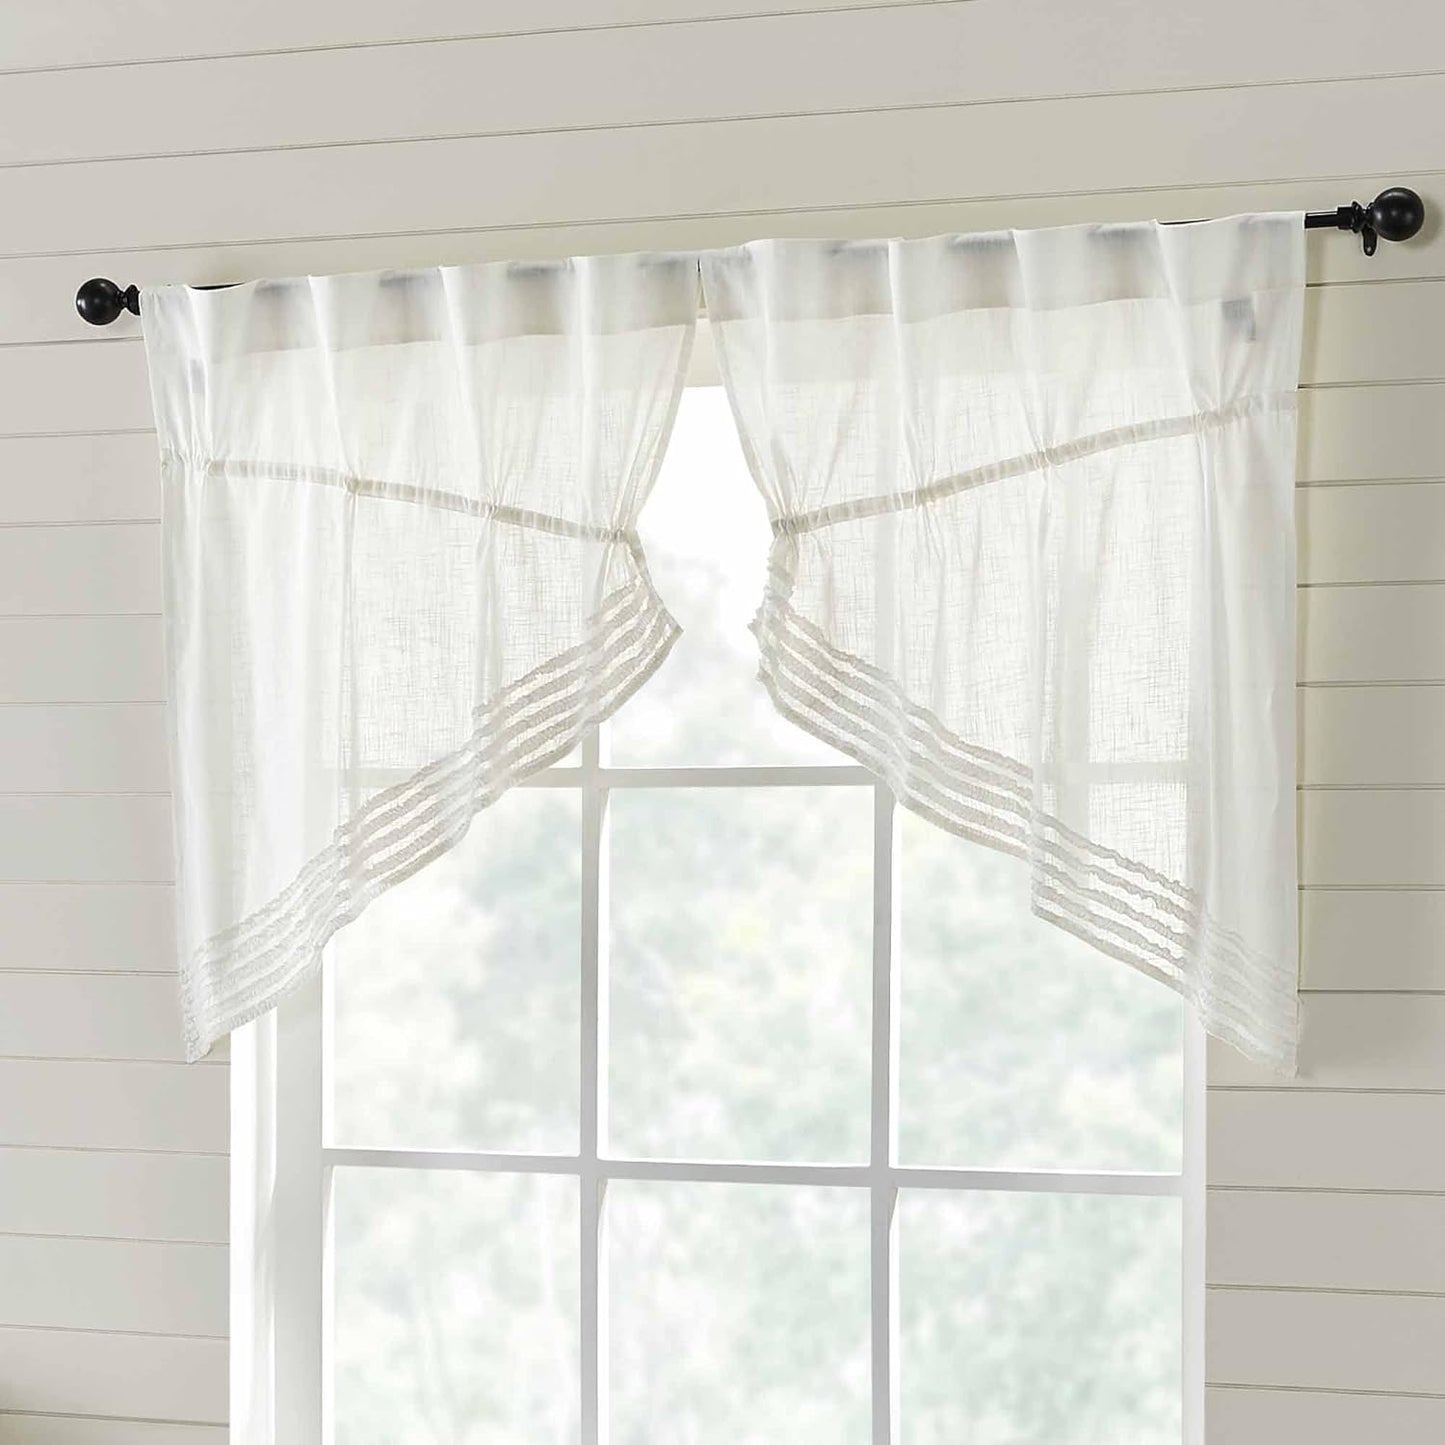 Kathryn Tier Curtains, Set of 2, 24" Long, Ruffled Curtains in a Linen-Look Soft White Cotton Semi-Sheer Fabric, Farmhouse, Cottage, Country Style Sheer Kitchen Café Curtains  Piper Classics Prairie Swag 36"  